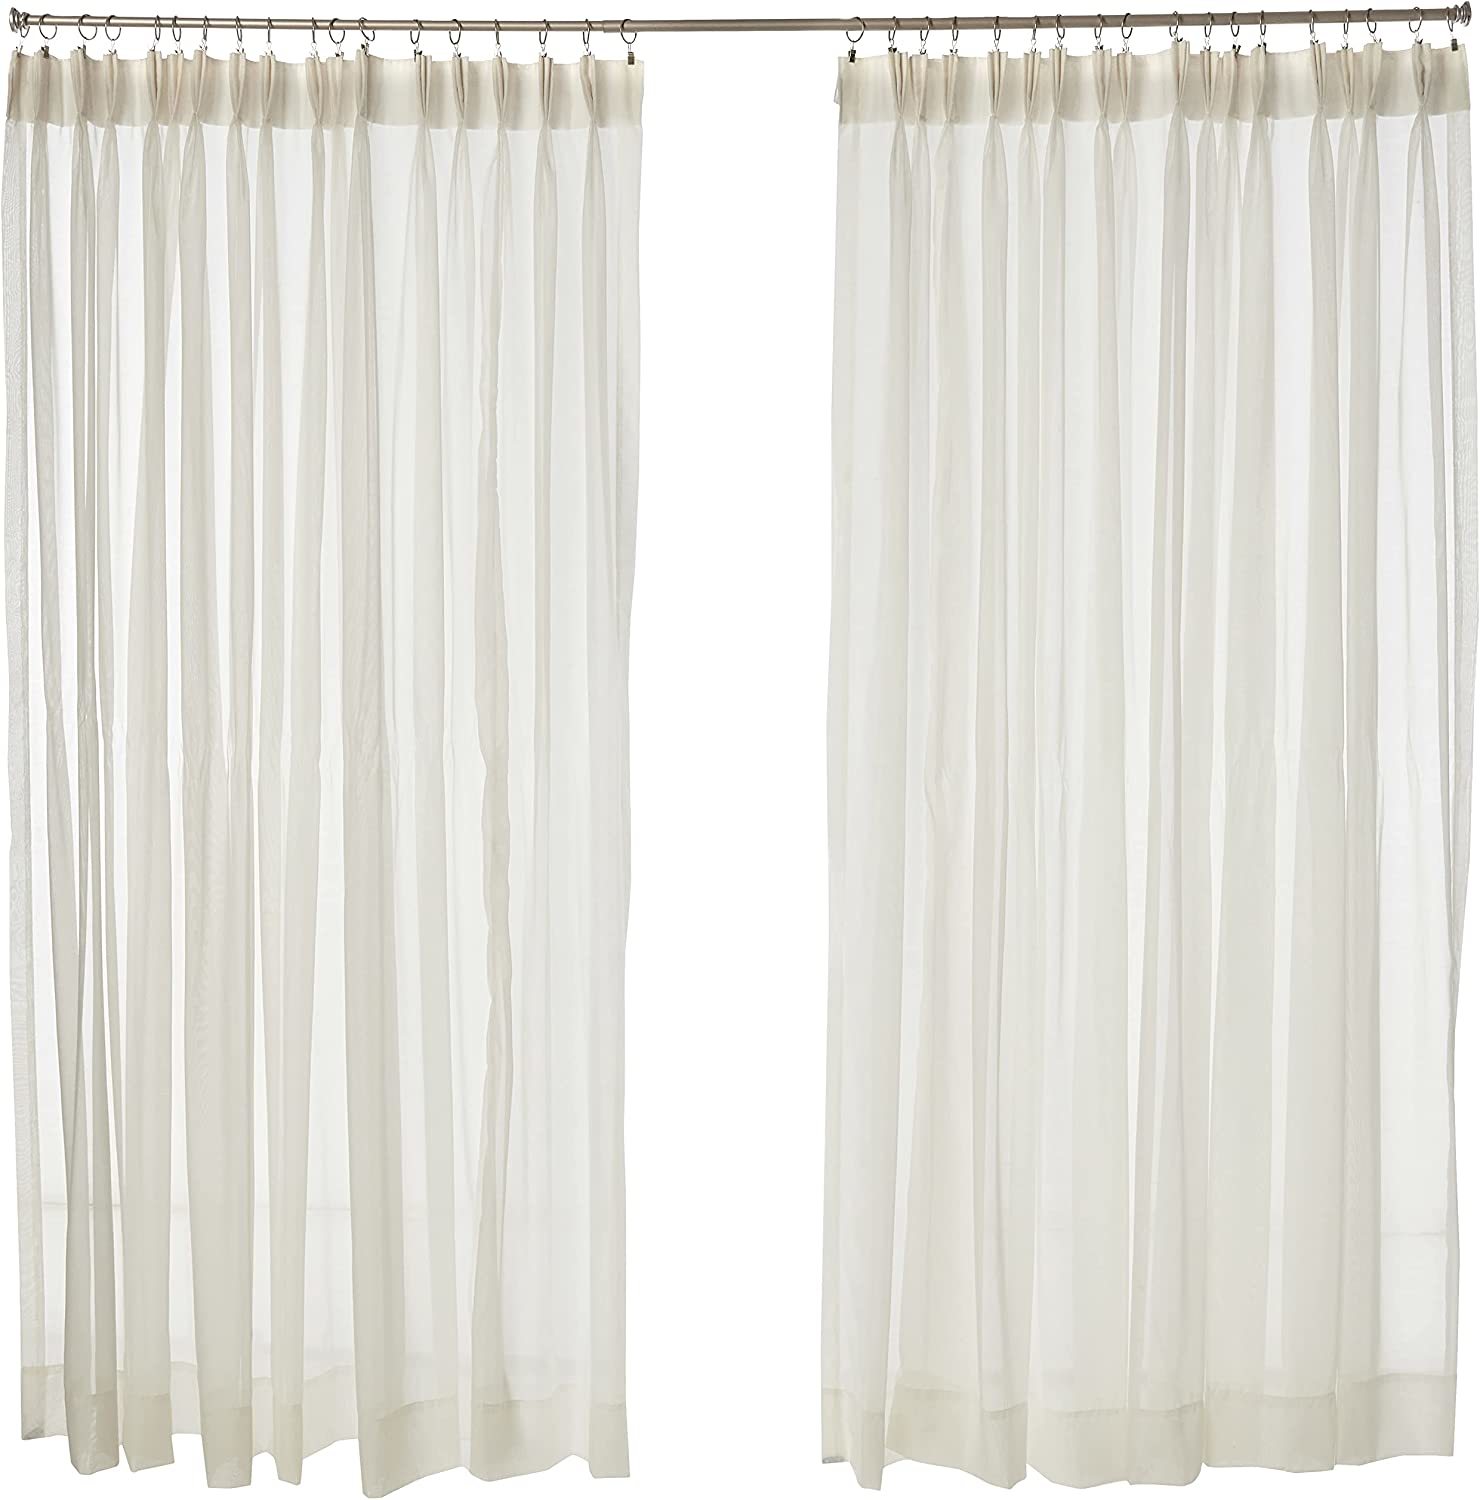 Stylemaster Splendor Pinch Pleated Drapes Pair, 2 Of 60" By 84", Beige. - $72.93